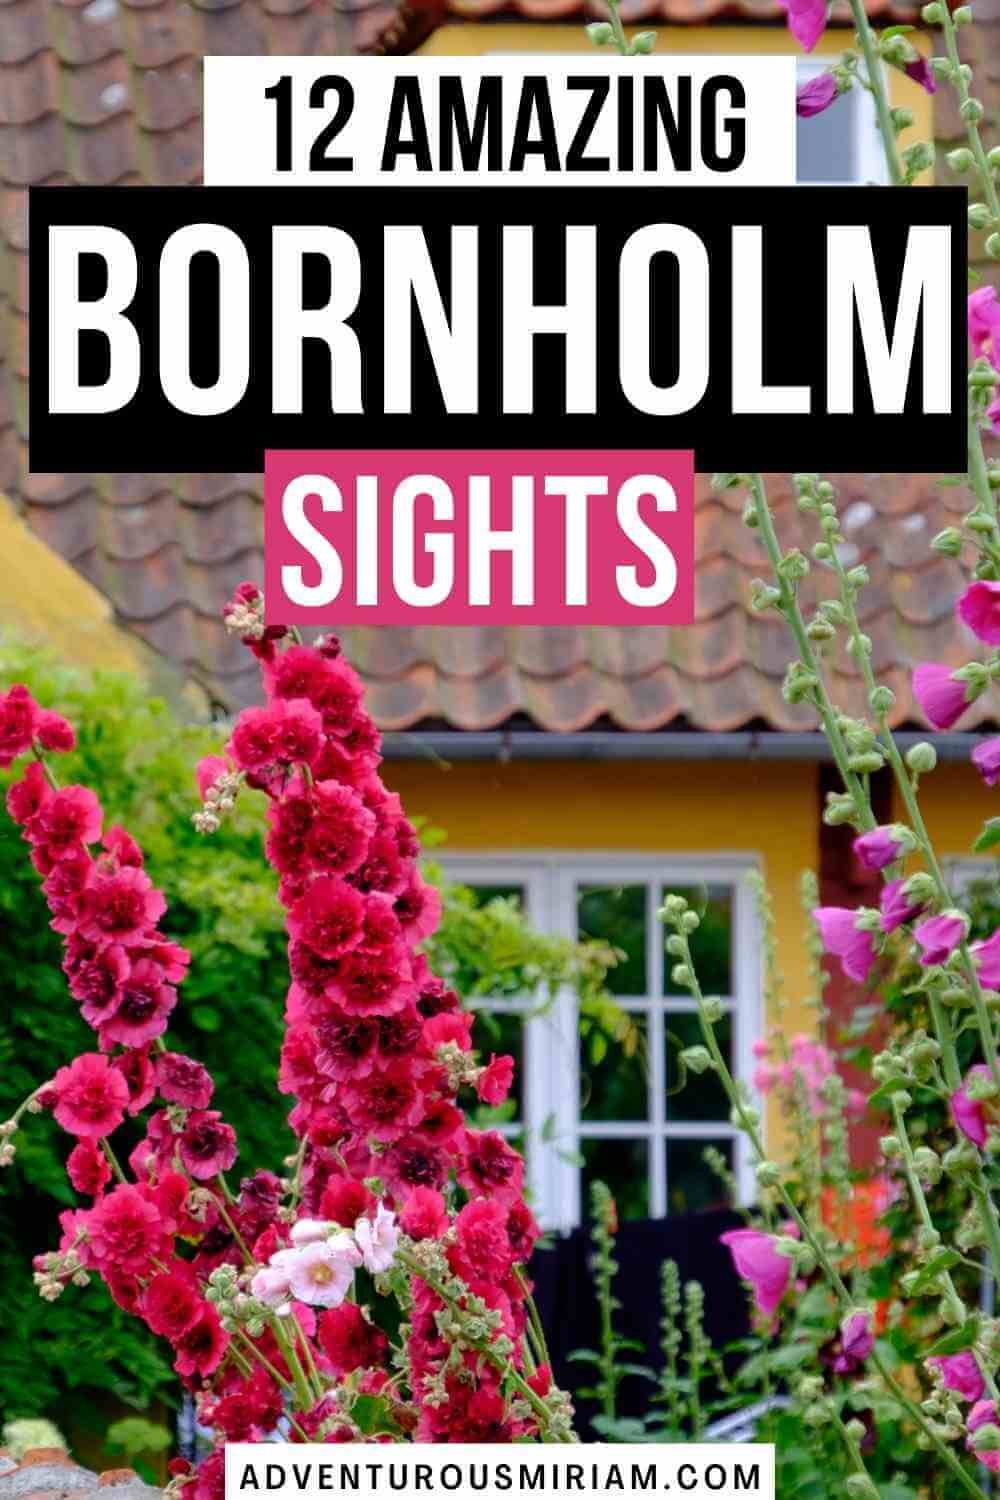 Want to visit a fairy tale island? Bornholm island in Denmark is the perfect place for it with its time warp, magical forests, medieval fortresses and glorious organic food. Find out what to do in Bornholm Denmark and how to get there easily from Copenhagen. #bornholm #denmark #visitdenmark #travel